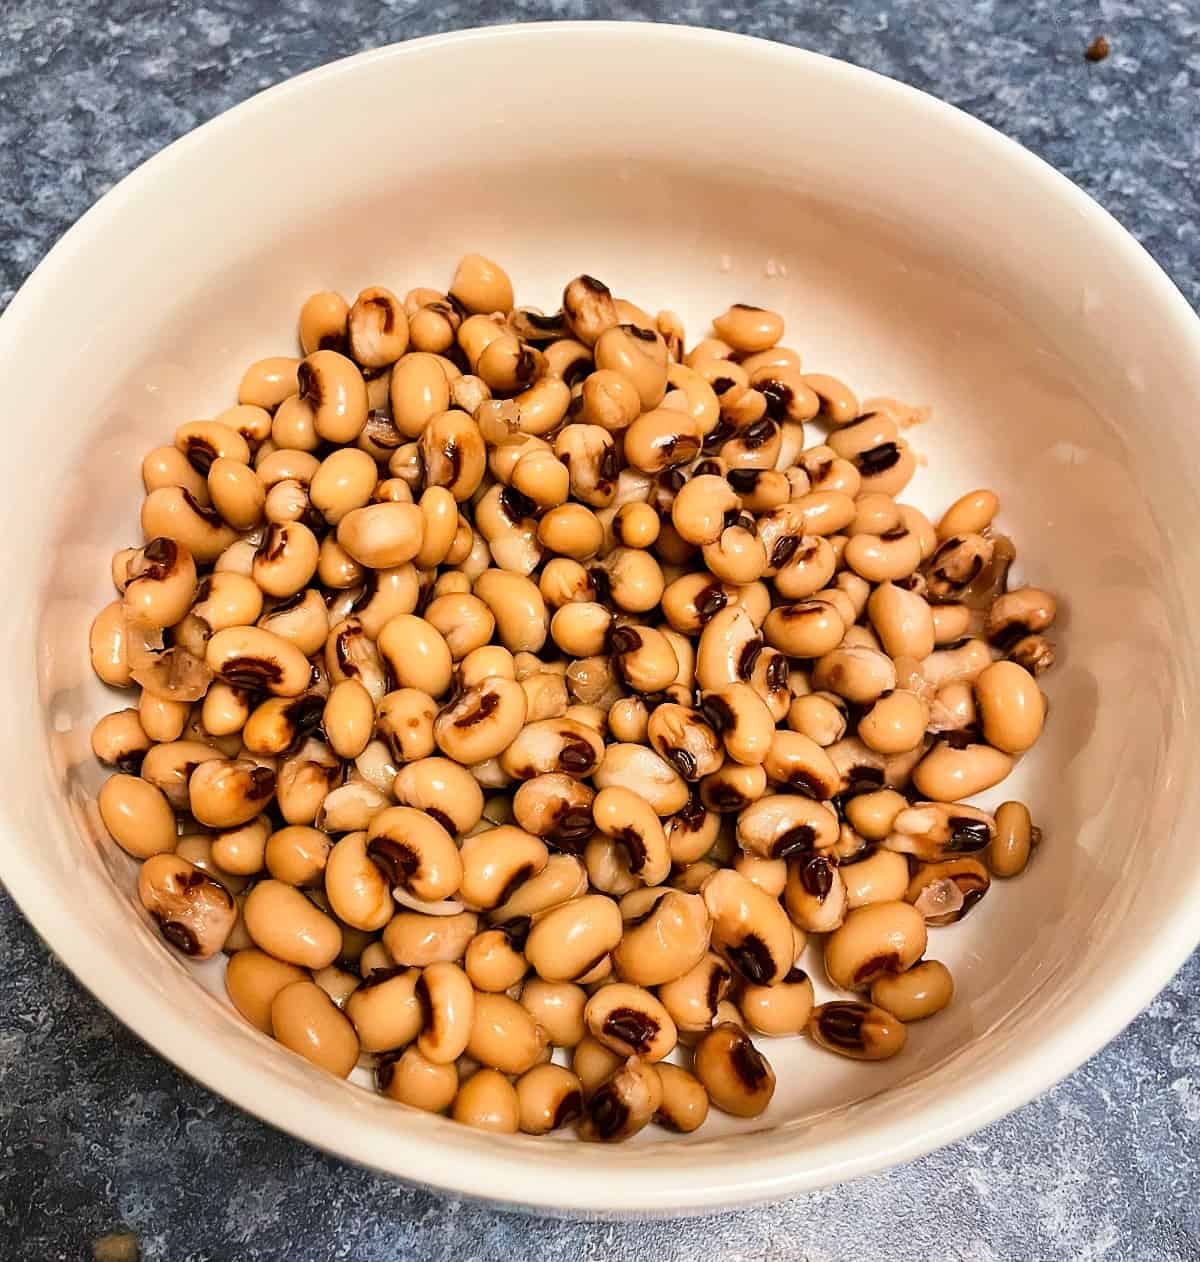 black-eyed peas in a white bowl, after rinsing.